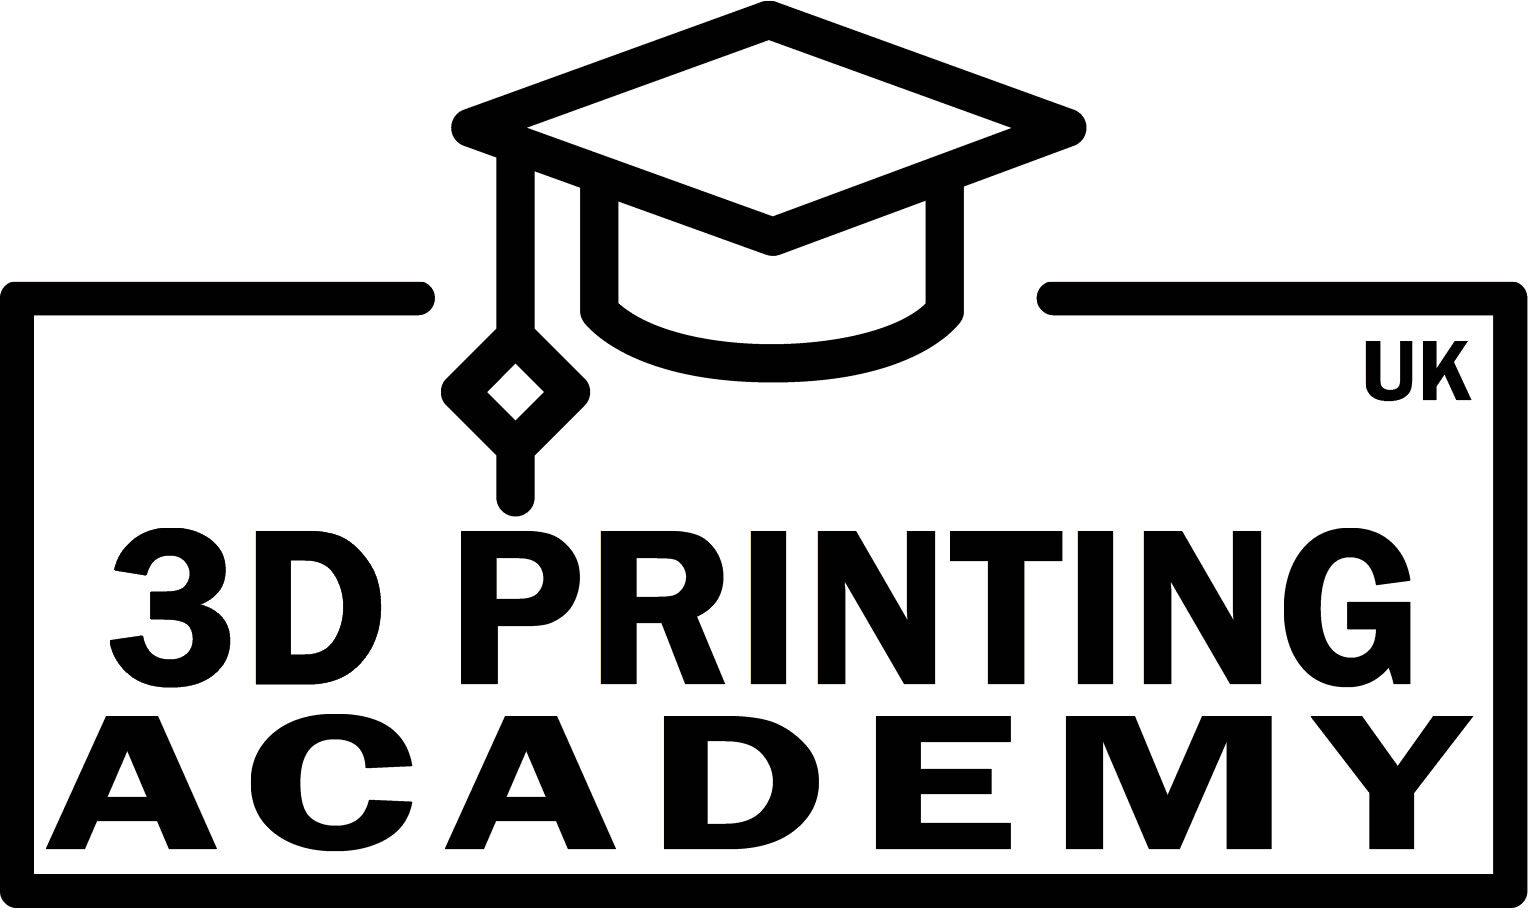 3D Printing Academy - Home of the after school 3D Printing clubs